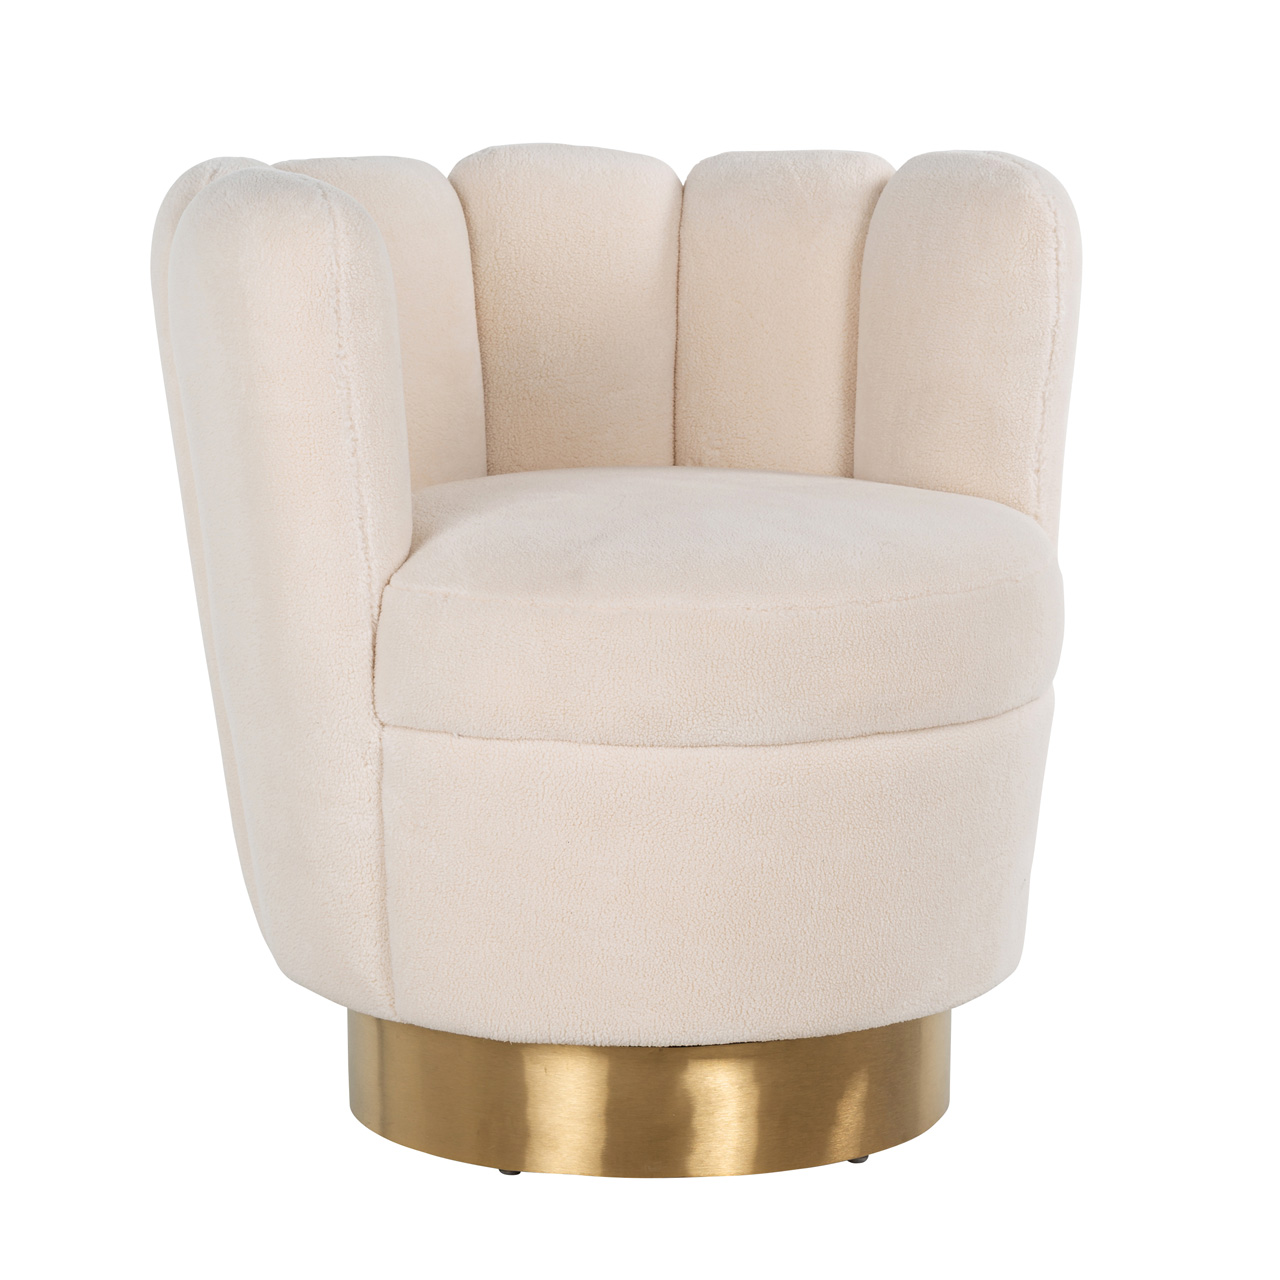 Hoes Meter Gewoon Fauteuil Mayfair White teddy / Brushed gold () - Vera Wonen